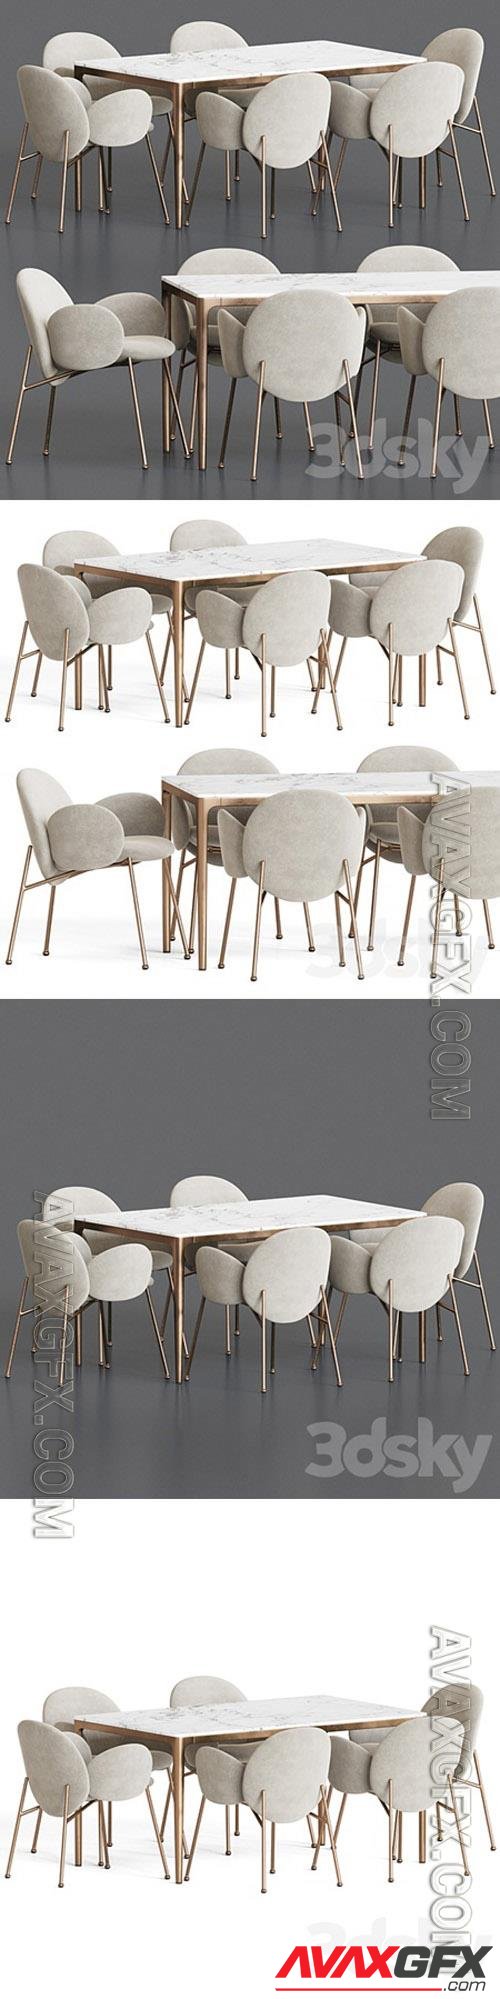 Ola Chair Canto Table Dining Set 3D Models